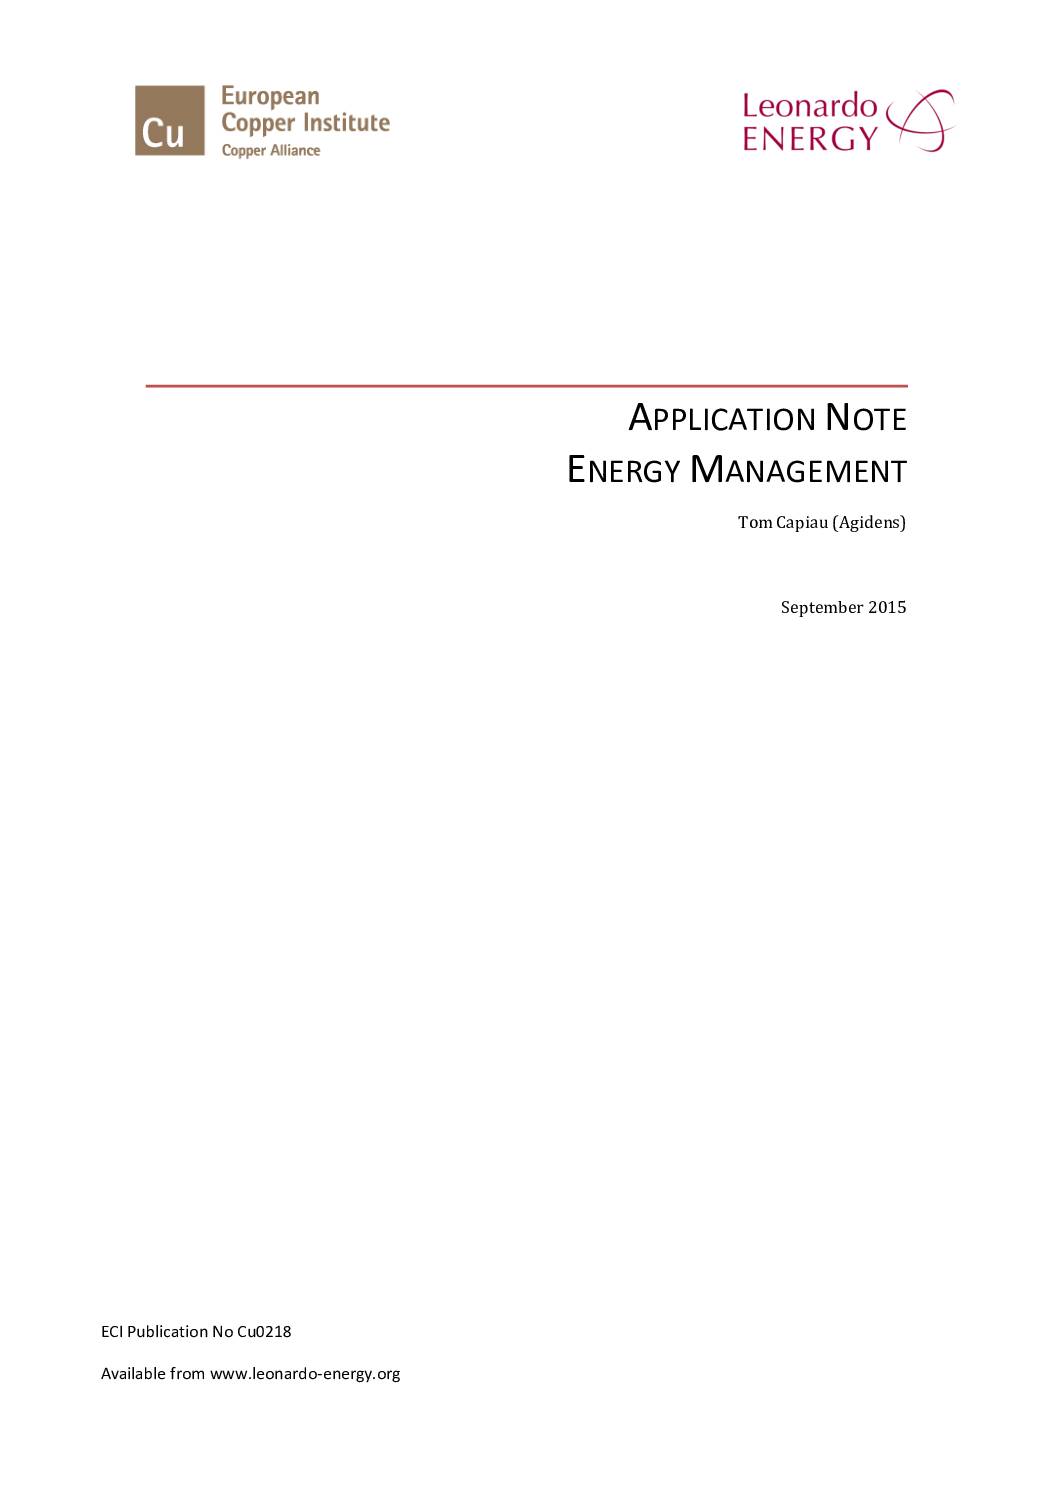 Application Note: Energy Management